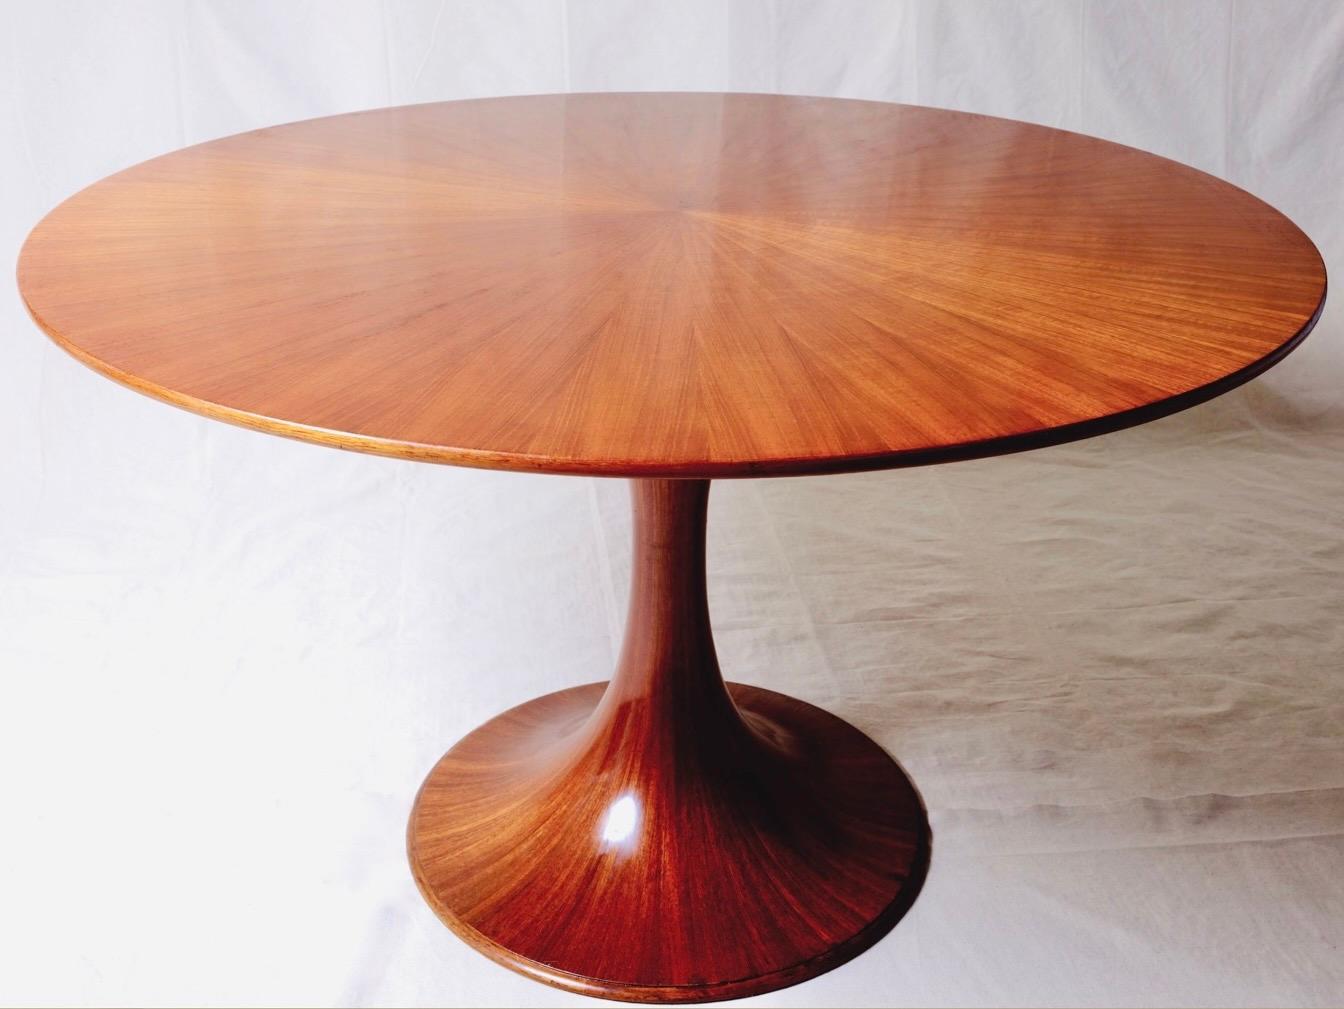 A timeless & compact dining table design by Luigi Massoni for Mobilia, Italy 1950’s.

This is the most coveted & collectable ‘Sunburst’ version of the ‘Clessidra’ table with both the ‘sunburst’ top & tulip base to match.

Italian walnut,